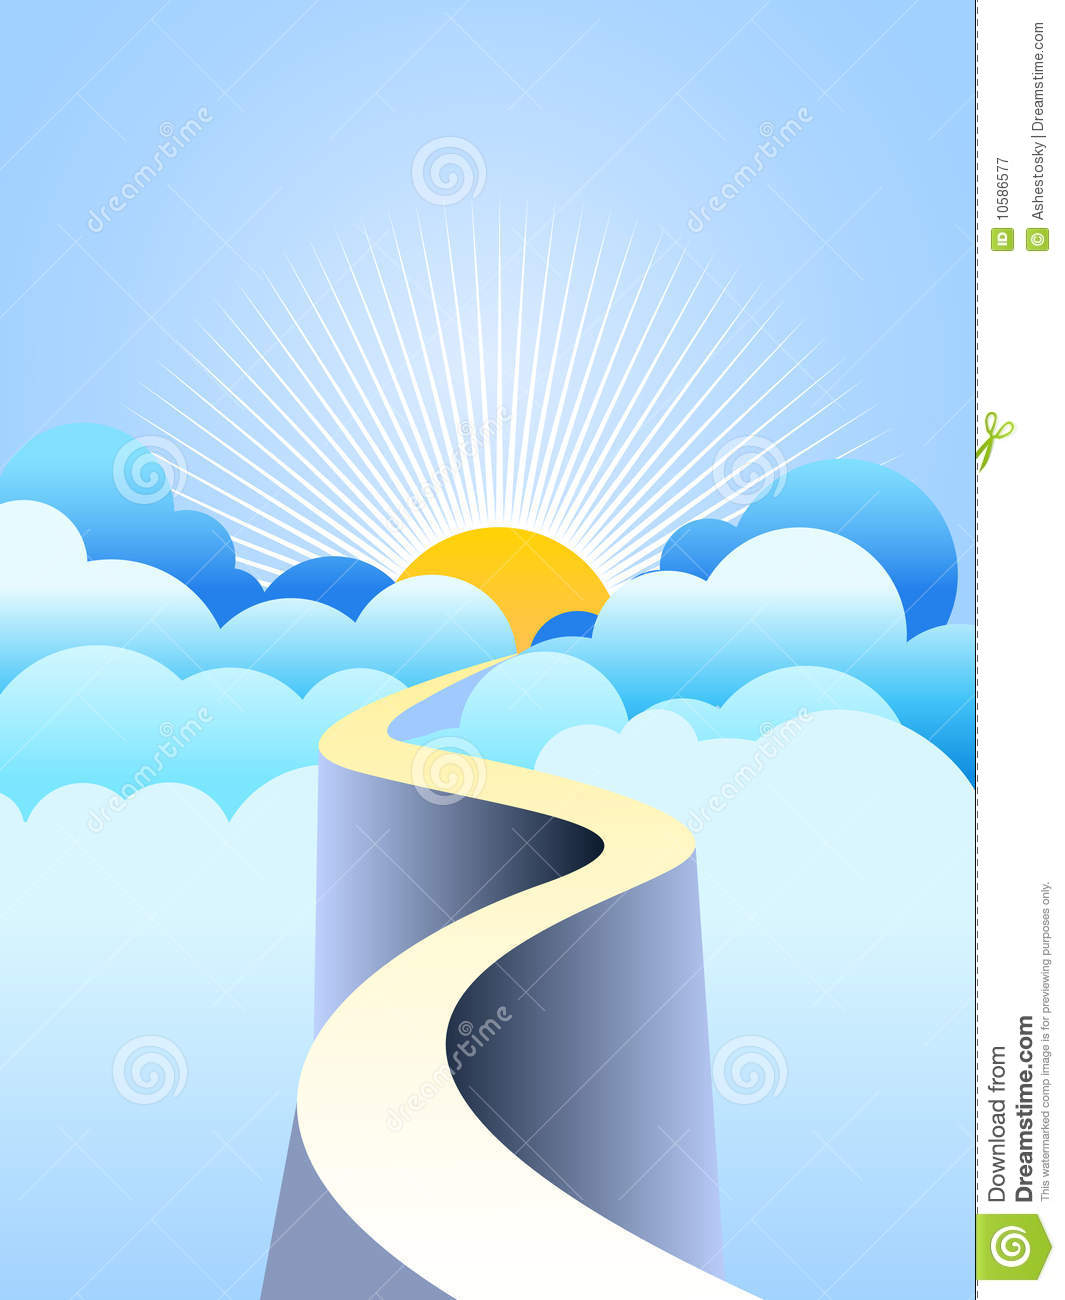 Road To Heaven Royalty Free Stock Photography   Image  10586577